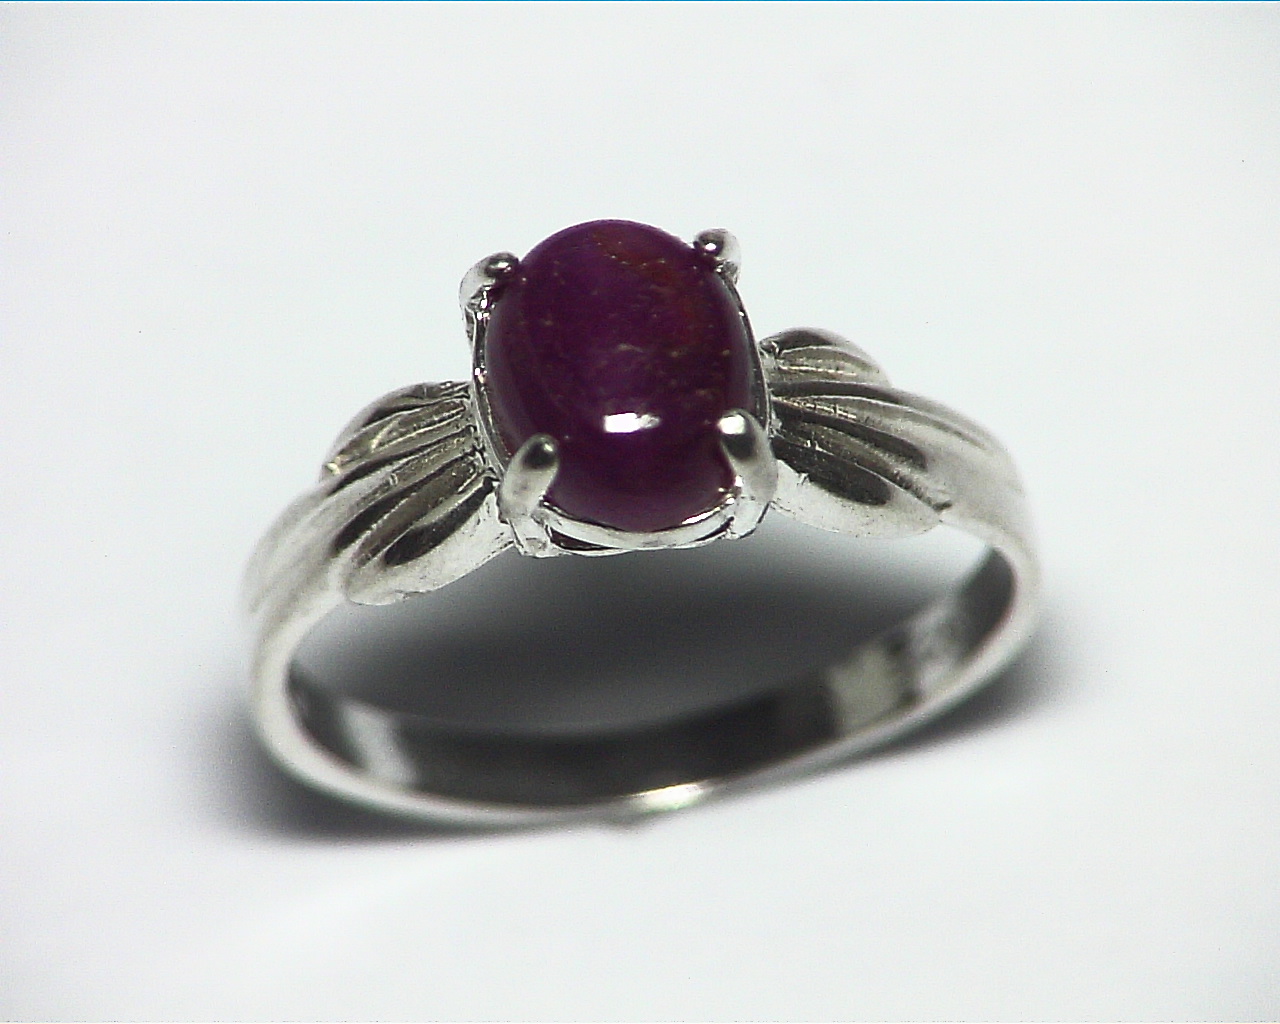 Star Ruby Cabochon Natural Genuine Gemstone Sterling Silver Ring RSS,488 2